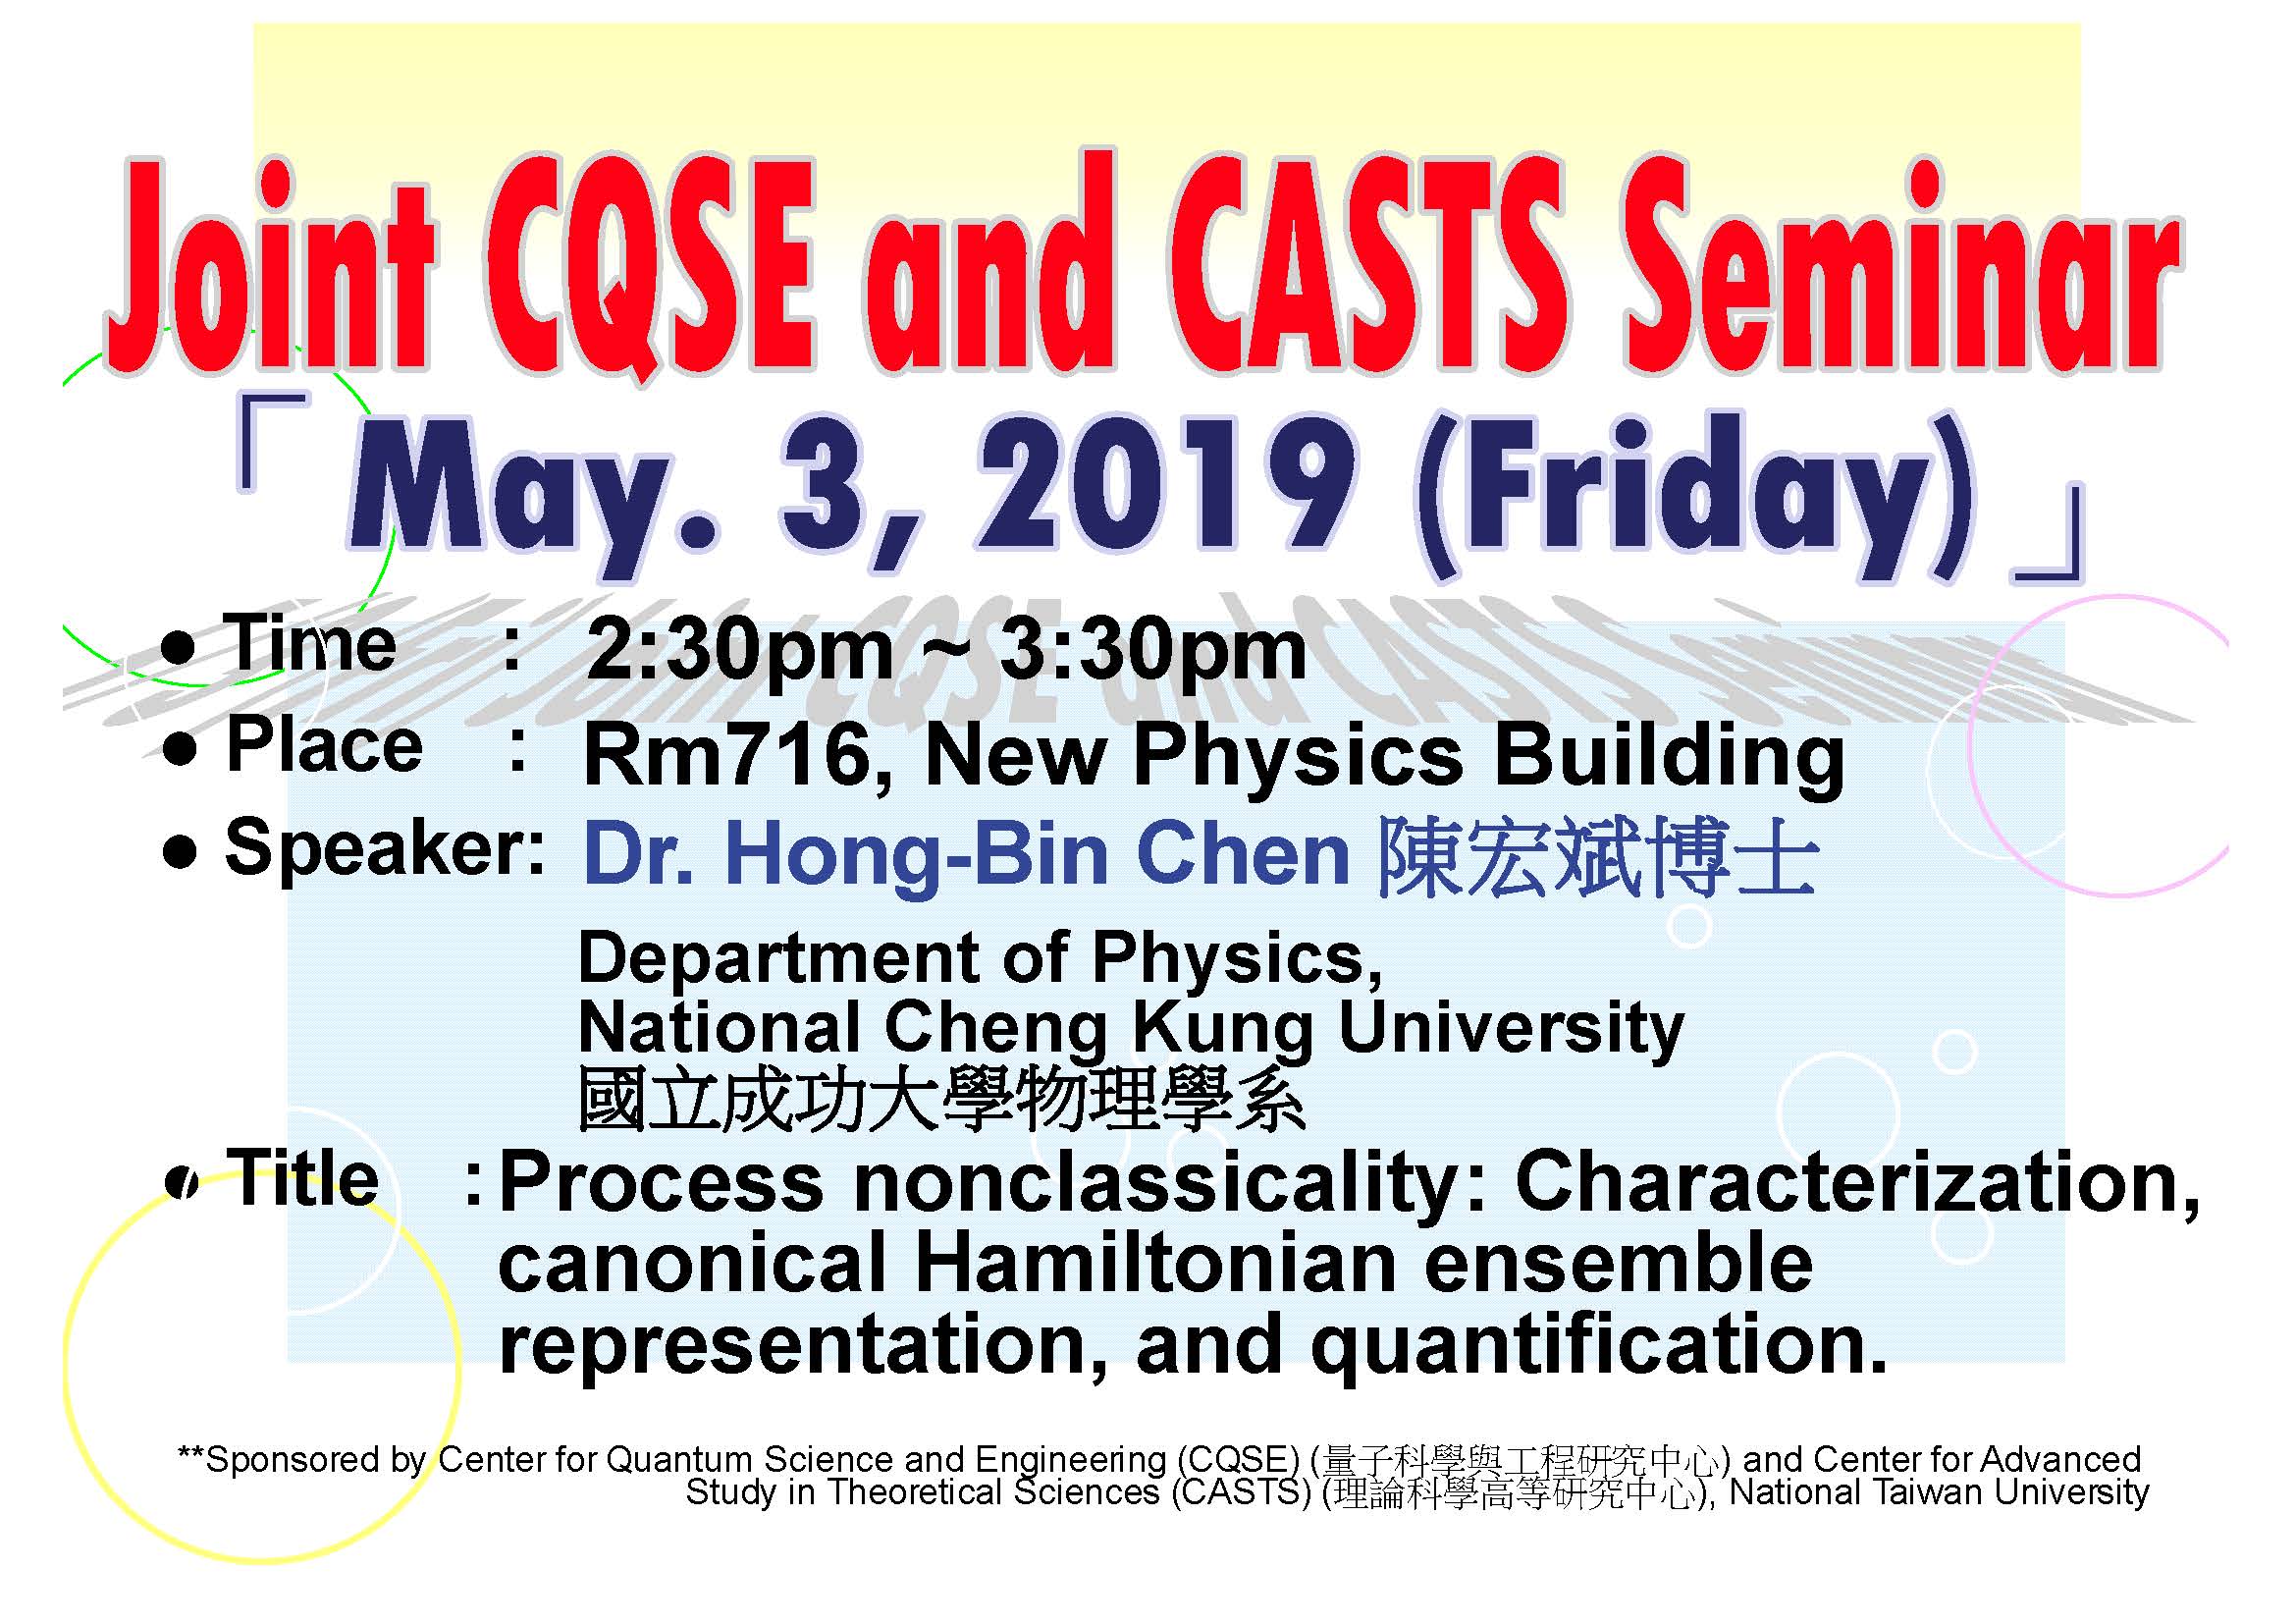 Joint CQSE and CASTS Special Seminar 